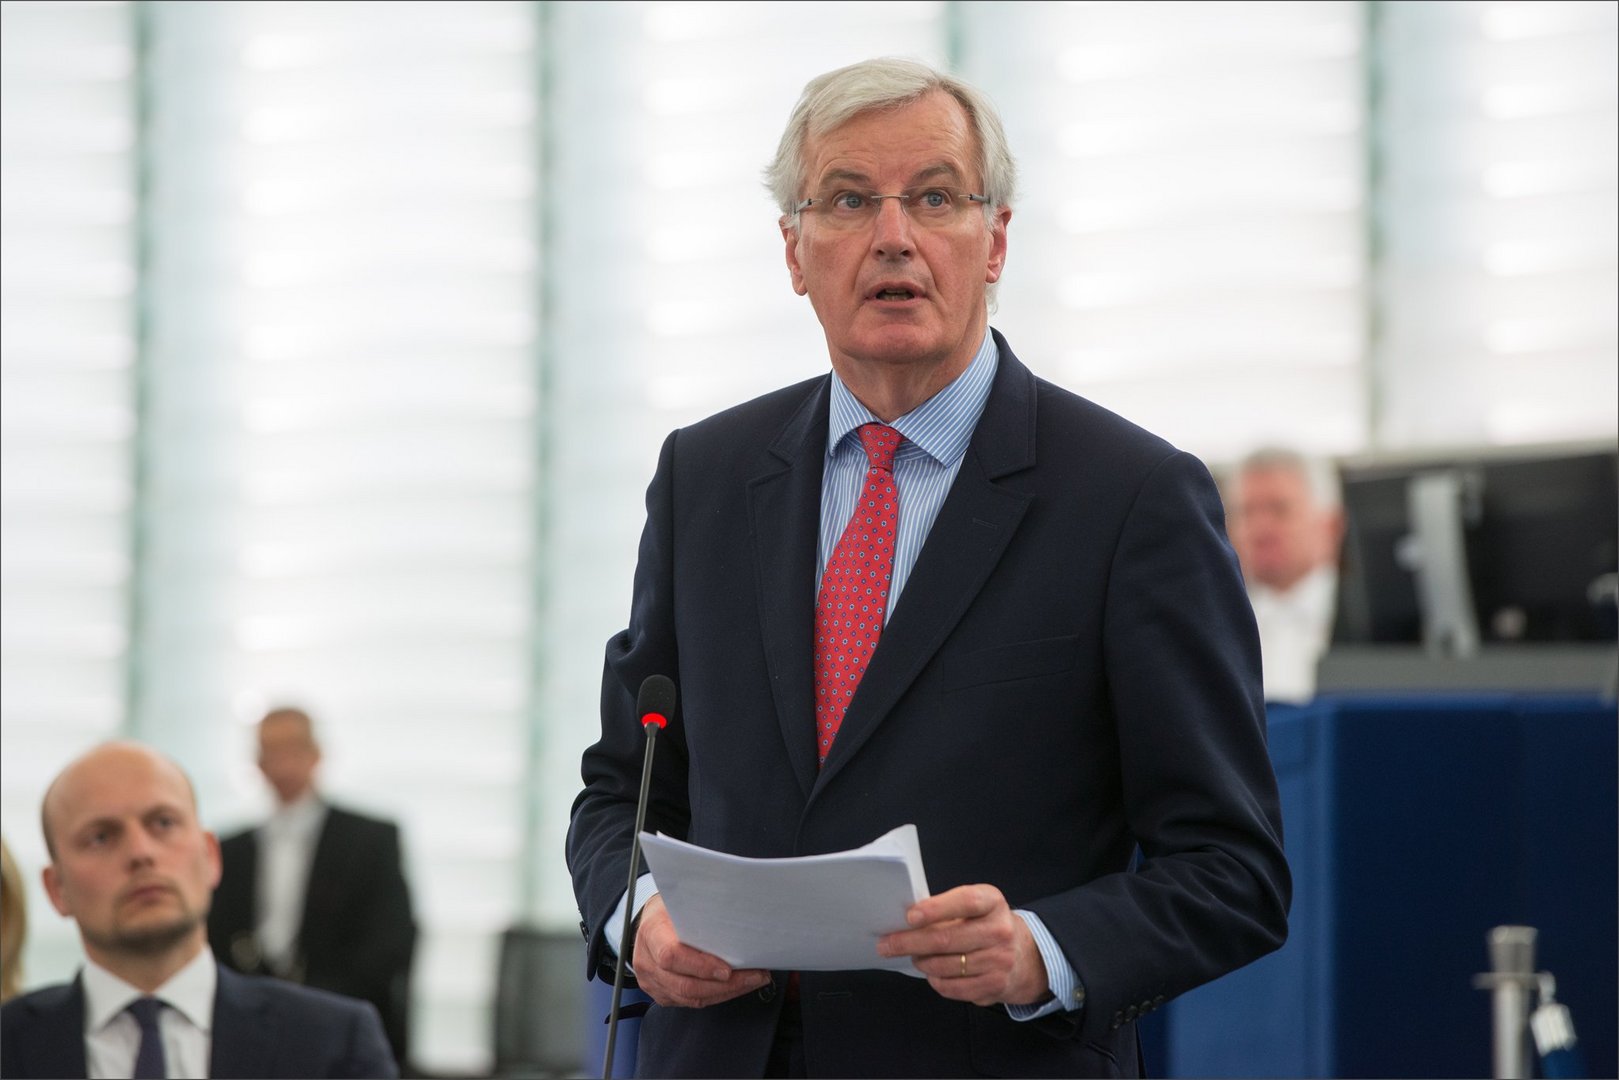 image Brexit negotiator Barnier calls for 5-year moratorium on EU immigration &#8212; British would be kept out of Europe